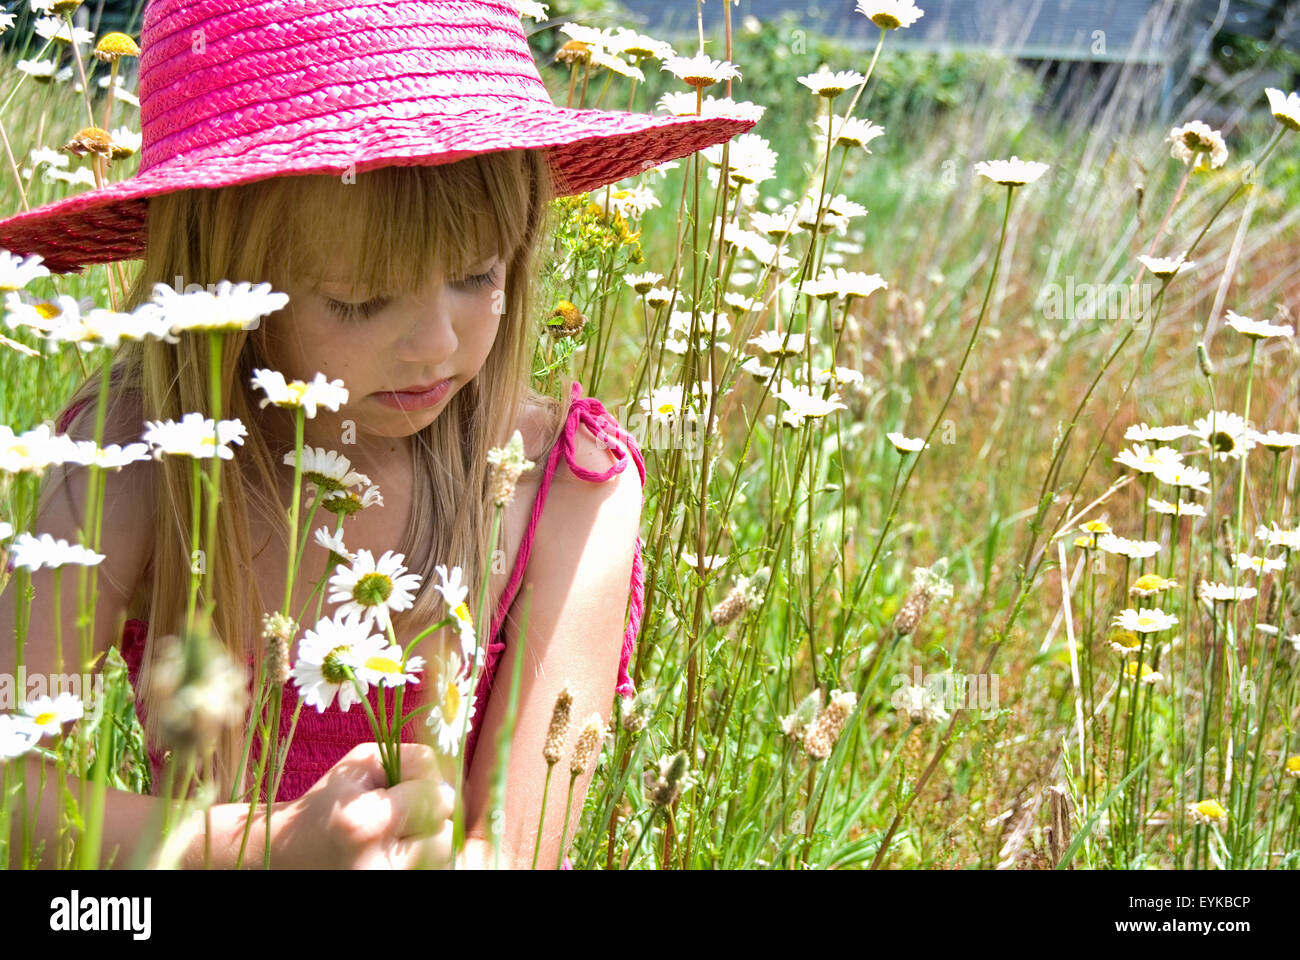 Young girl with pink hat in a field of wild daisies. Stock Photo